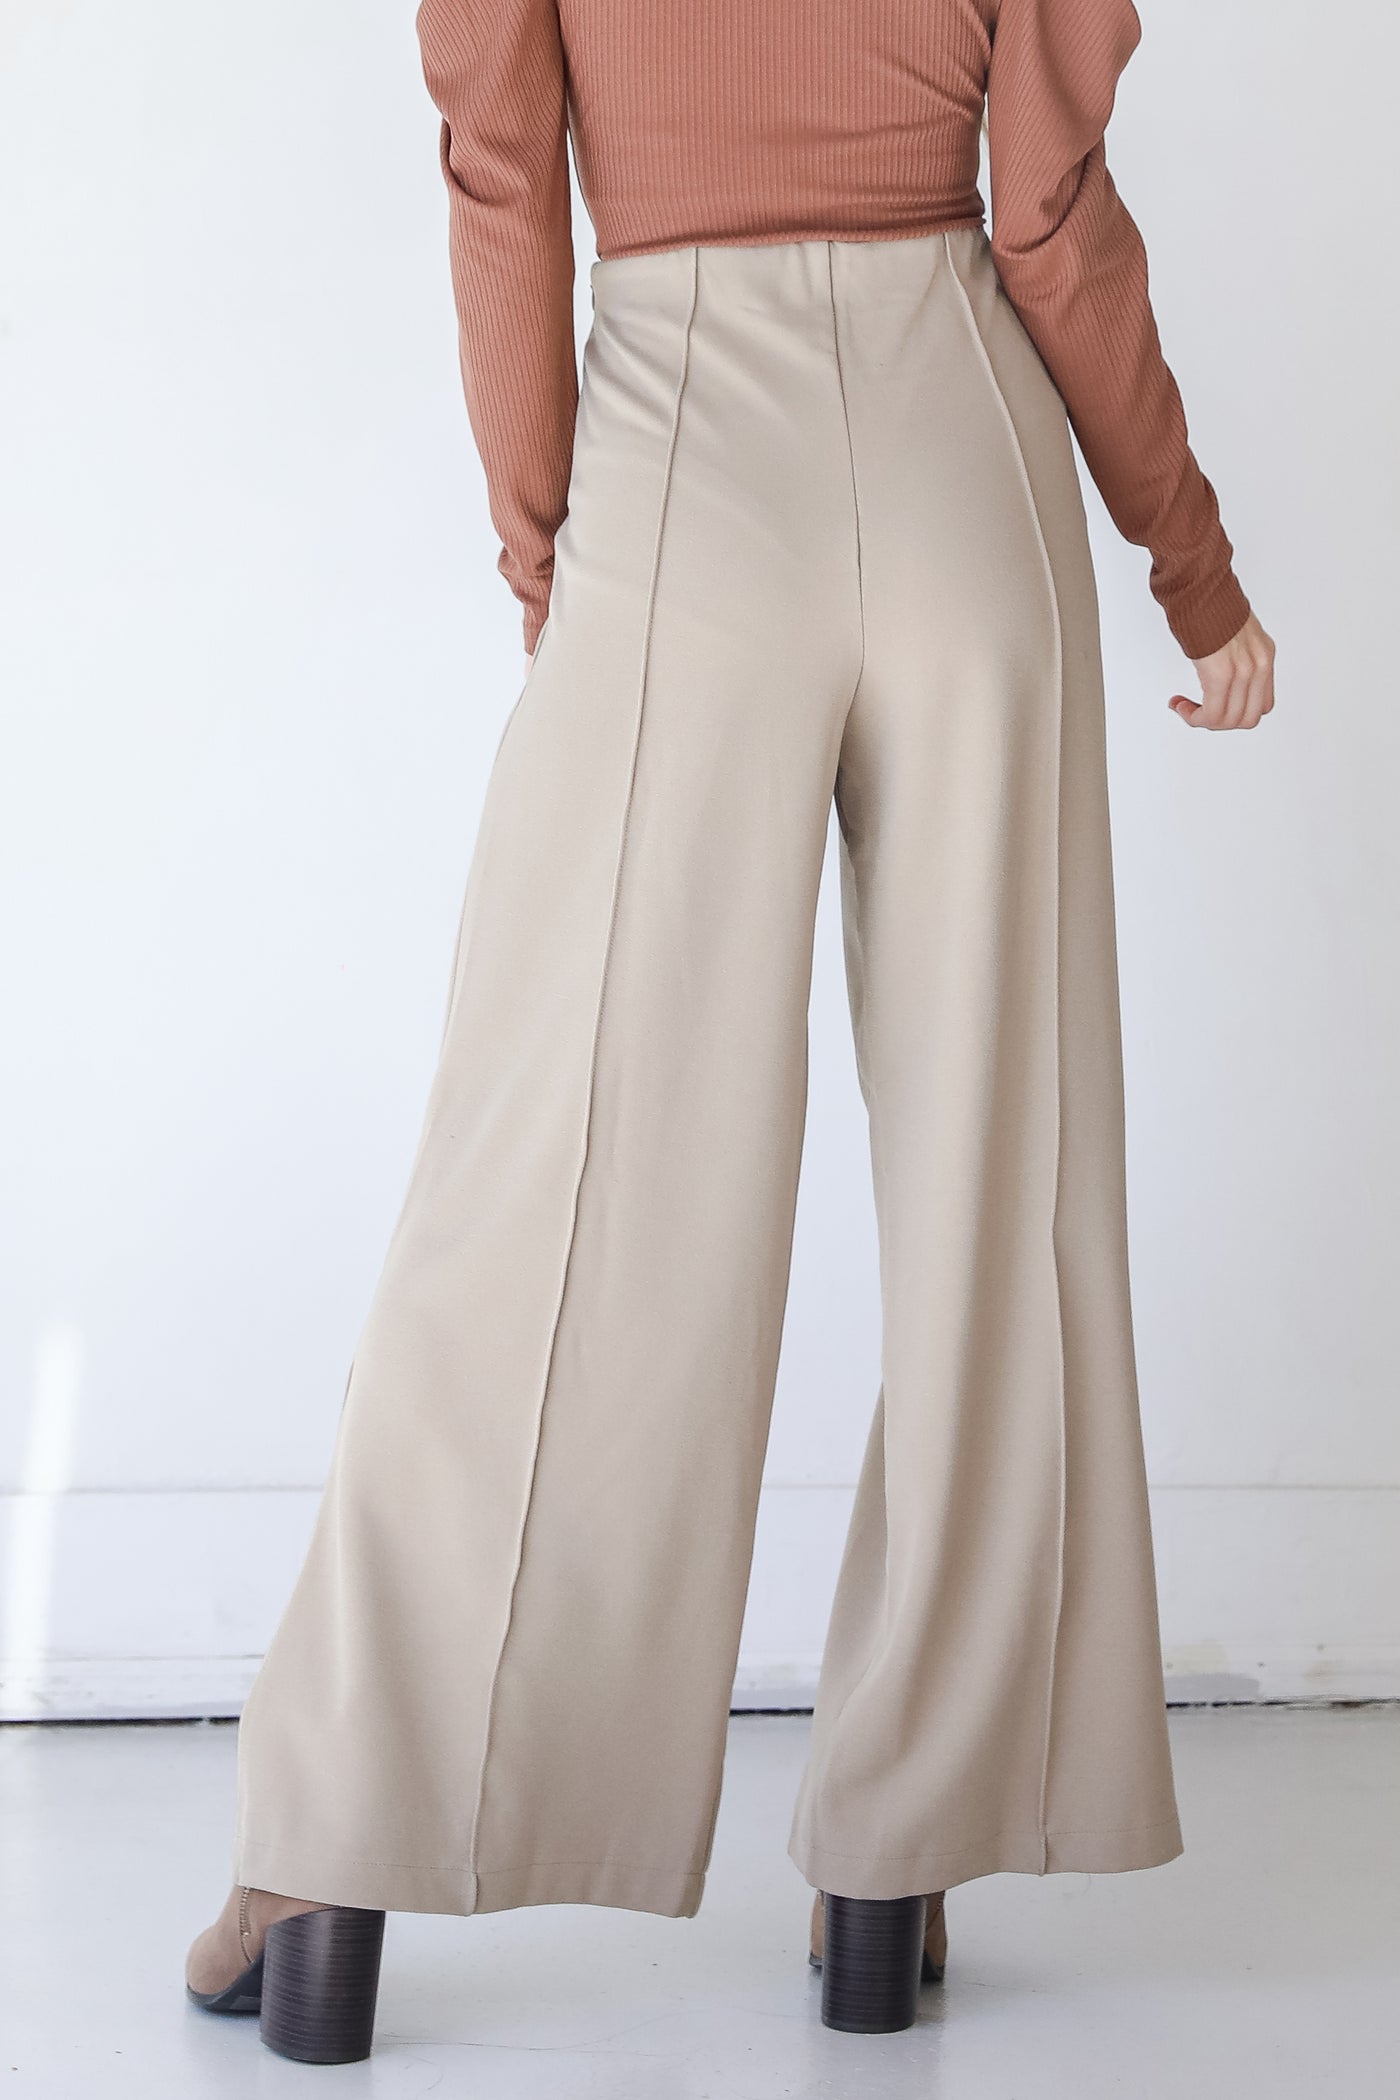 Pants in taupe back view